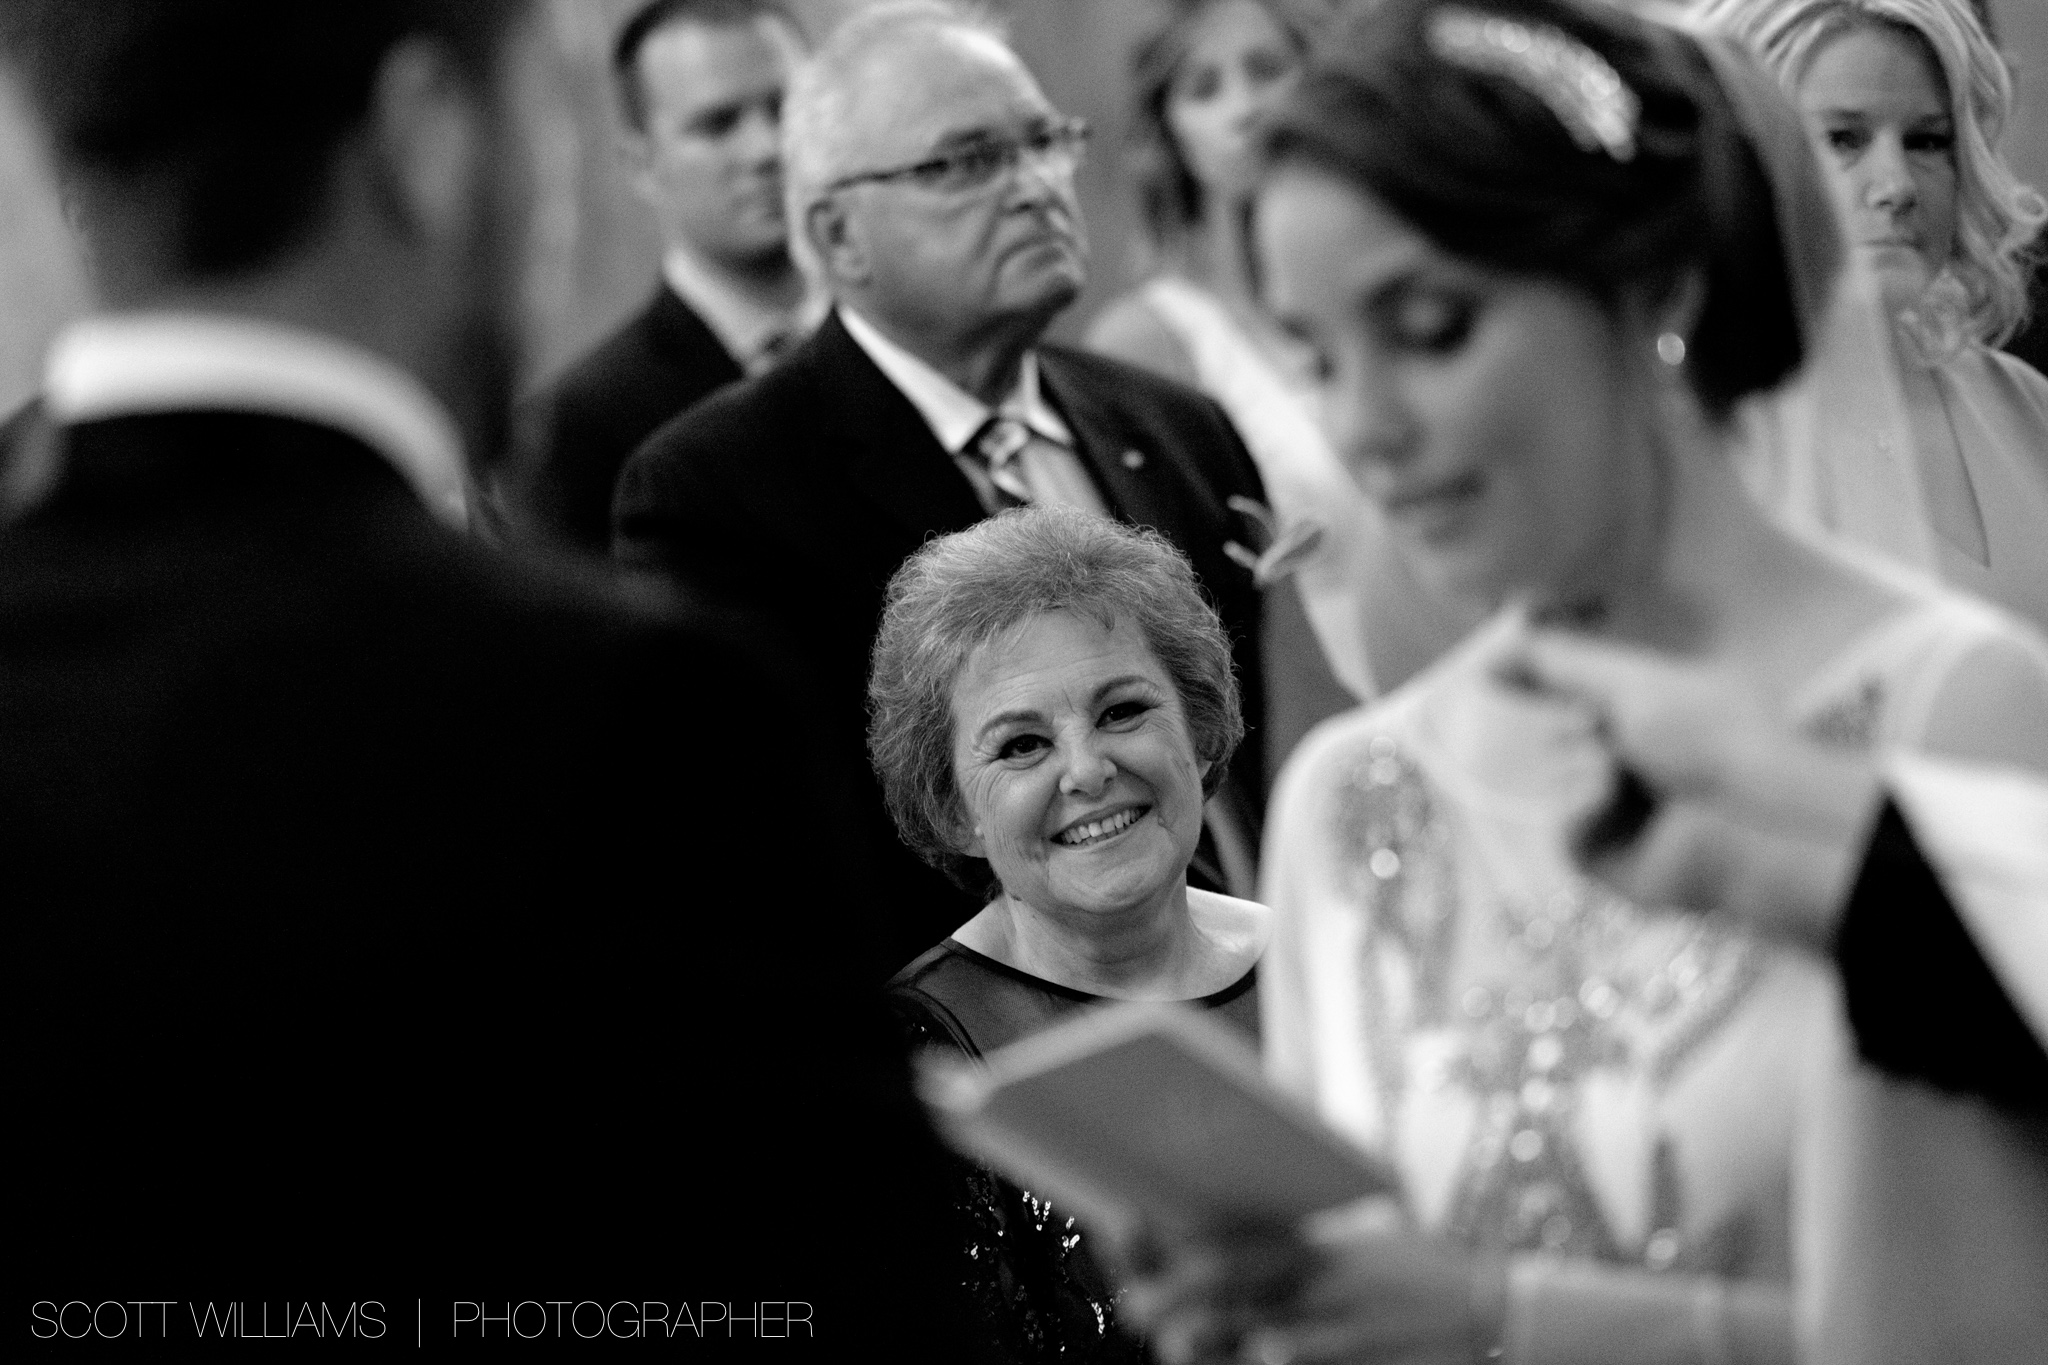  Christina's mother looks on as she and Tim exchange personal wedding vows during their Ukrainian wedding ceremony in Toronto. 